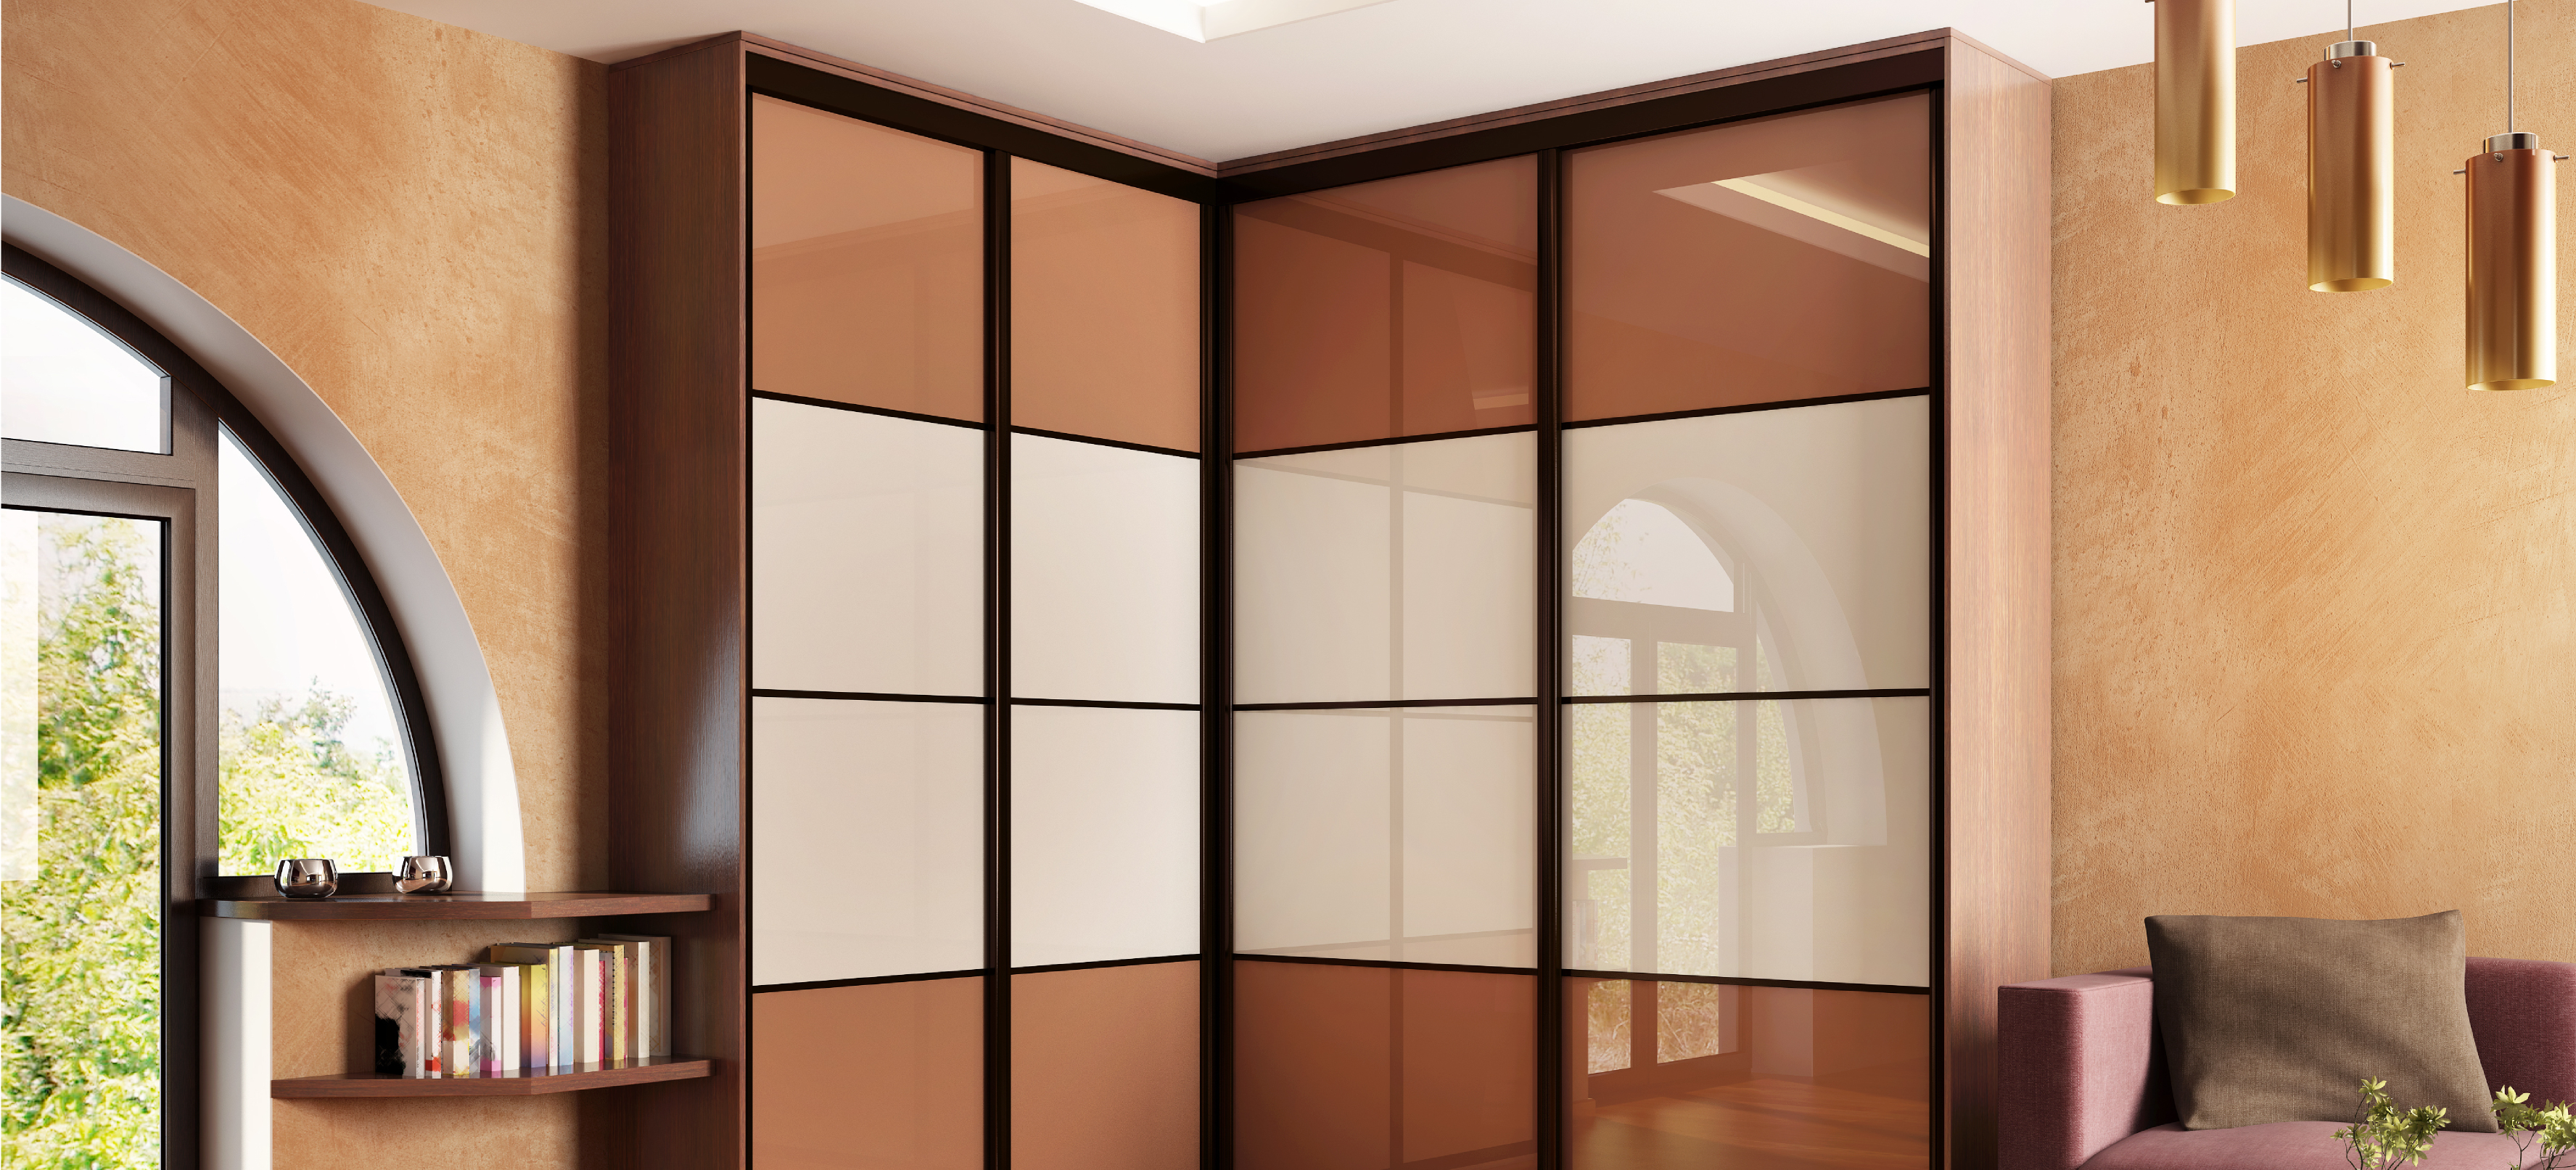 Why Should you invest in modular wardrobe for your bedroom